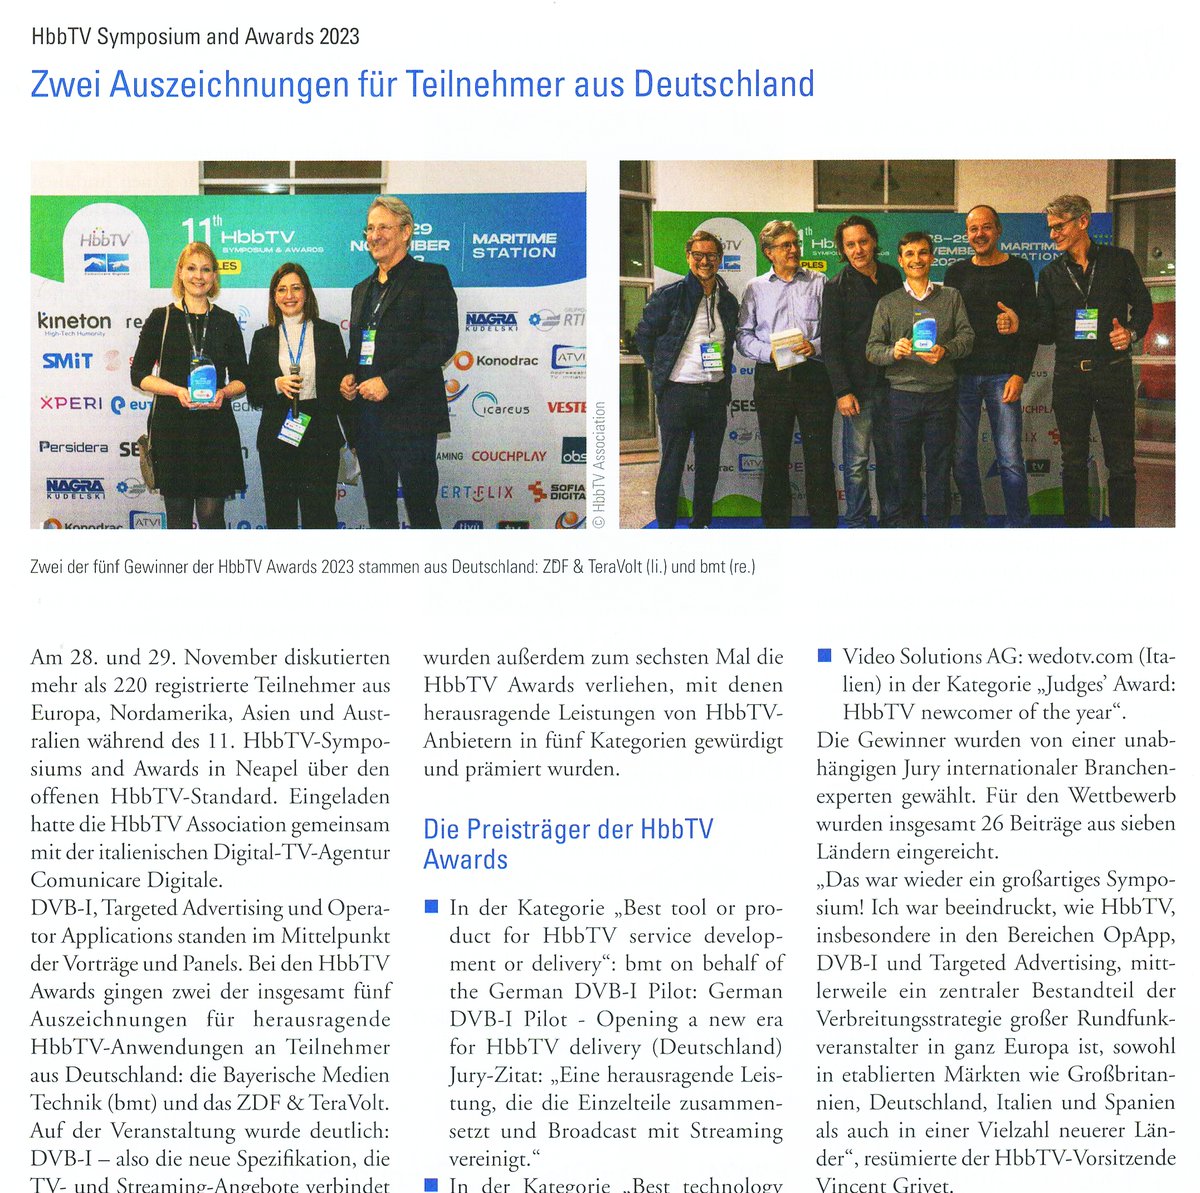 Great report in the current edition of German media magazine Cable!vision Europe on the two German winners of the #HbbTV Awards 2023! cablevision-europe.de @ZDF @ZDFpresse @teravoltgmbh @qvestgroup @BayMeTech #HbbTVAwards #HbbTVNaples